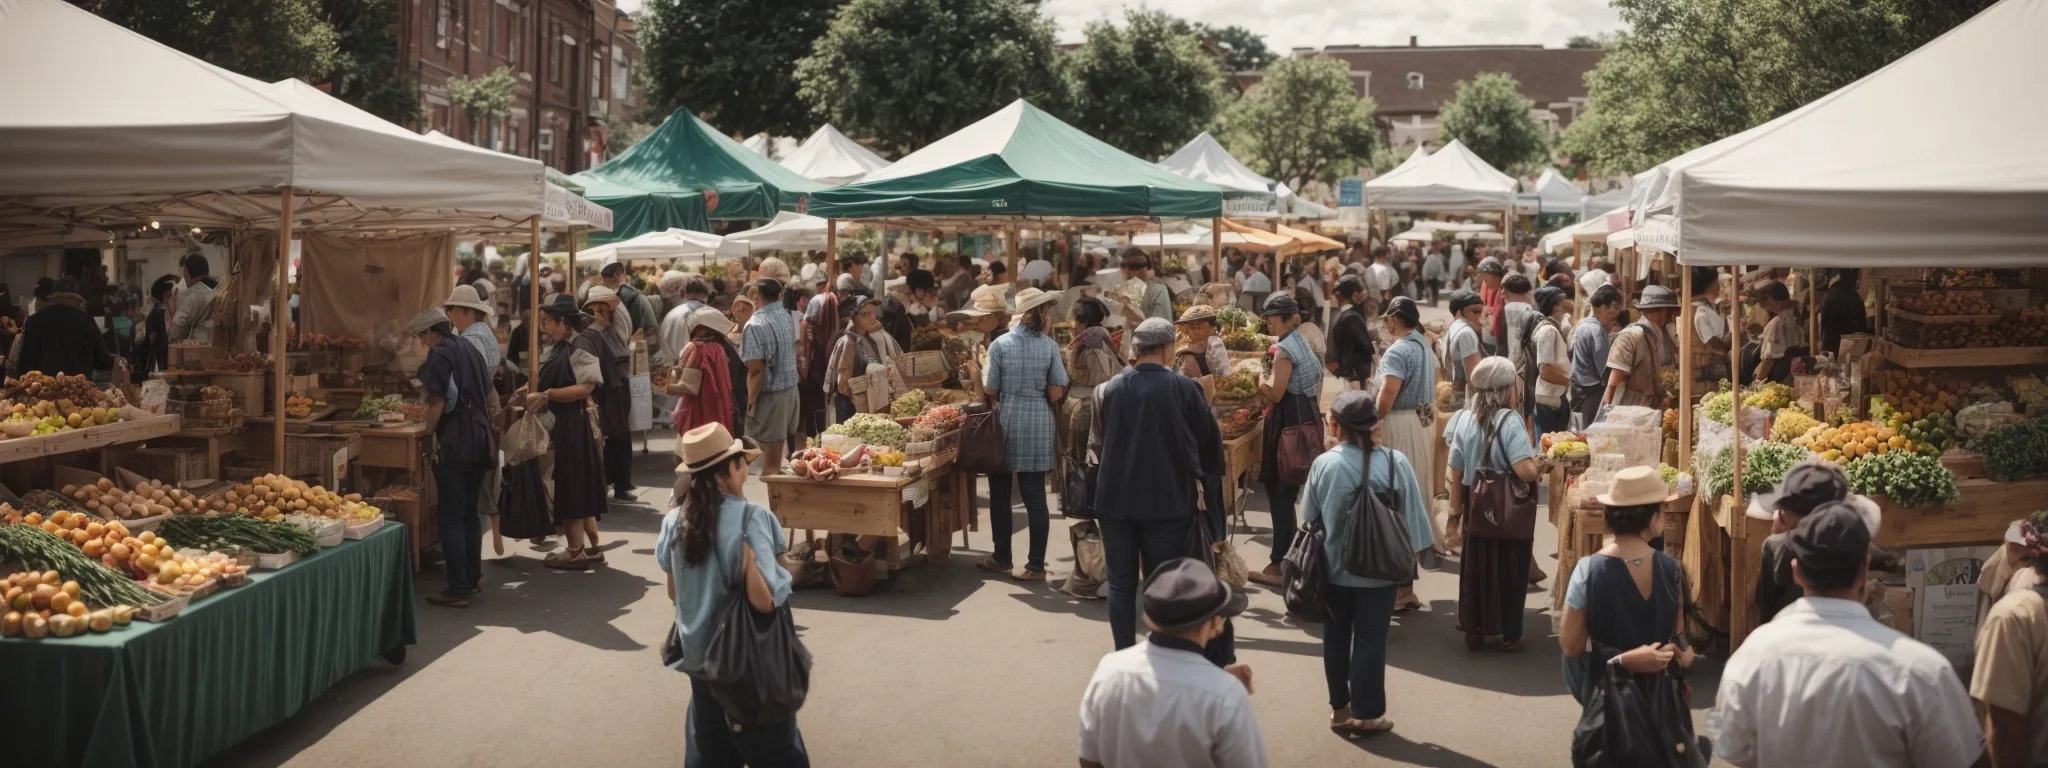 a bustling local farmers market with various stalls showcasing an array of products from local businesses.